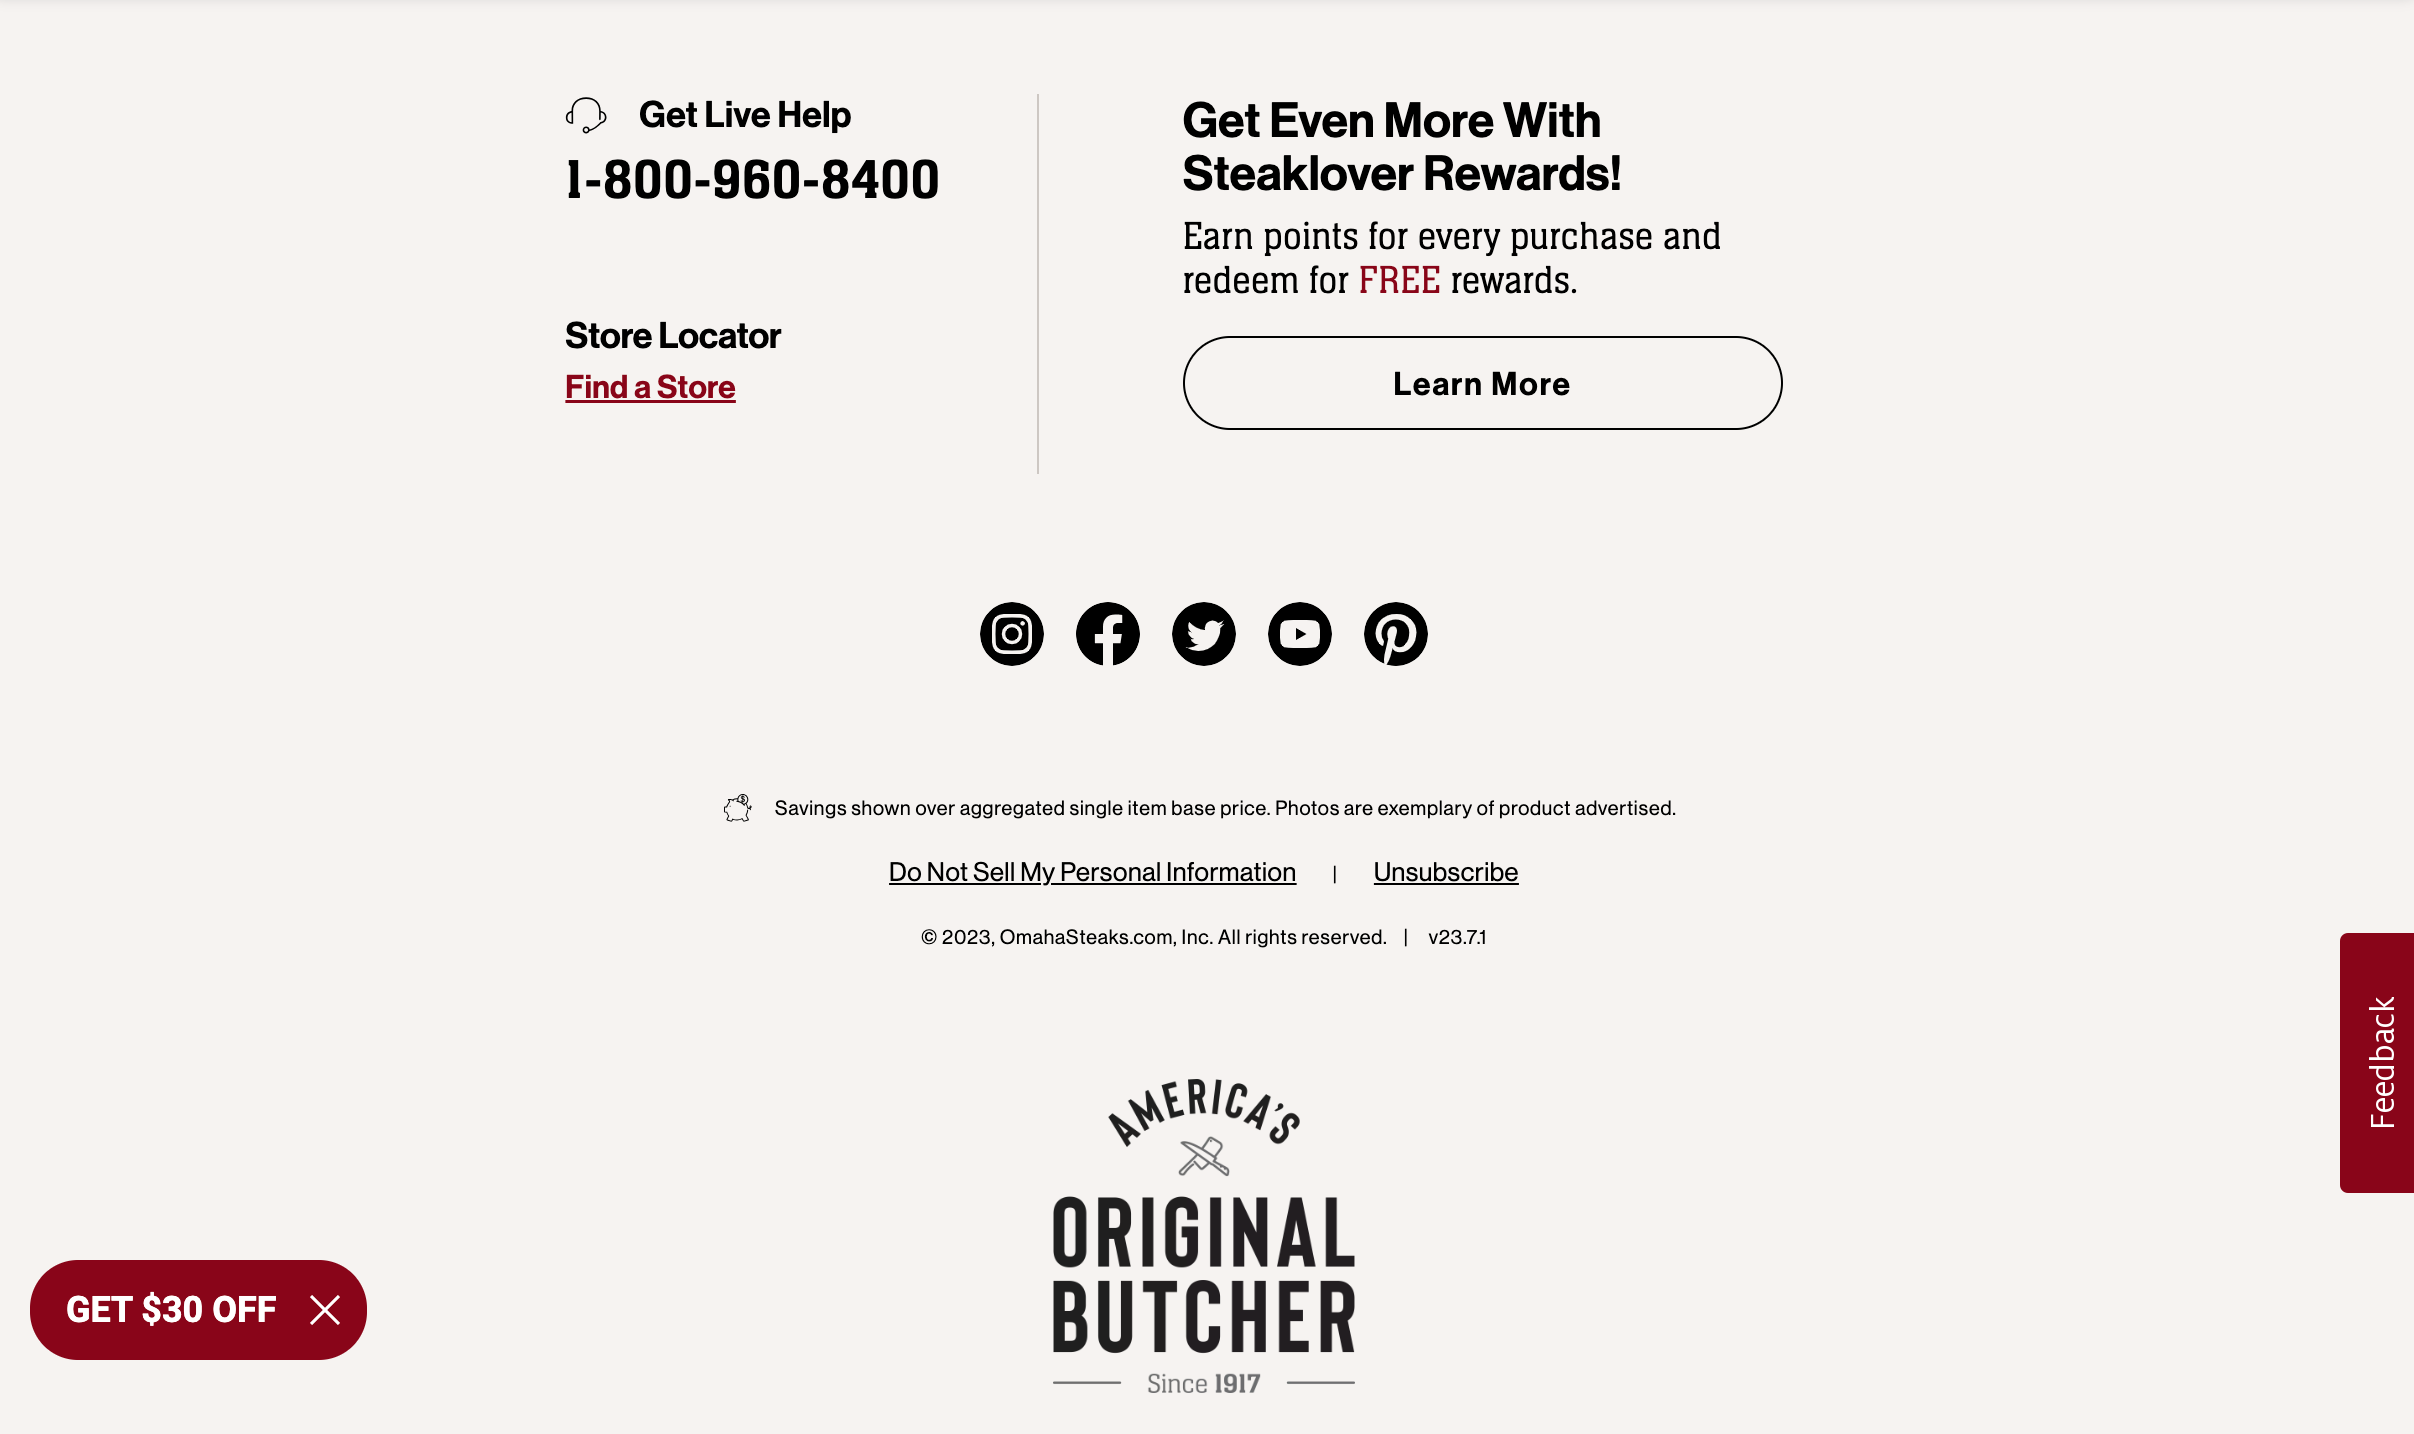 The page footer from the Omaha Steaks website, with a live help customer service phone number, social media links, rewards program information, and unsubscribe links